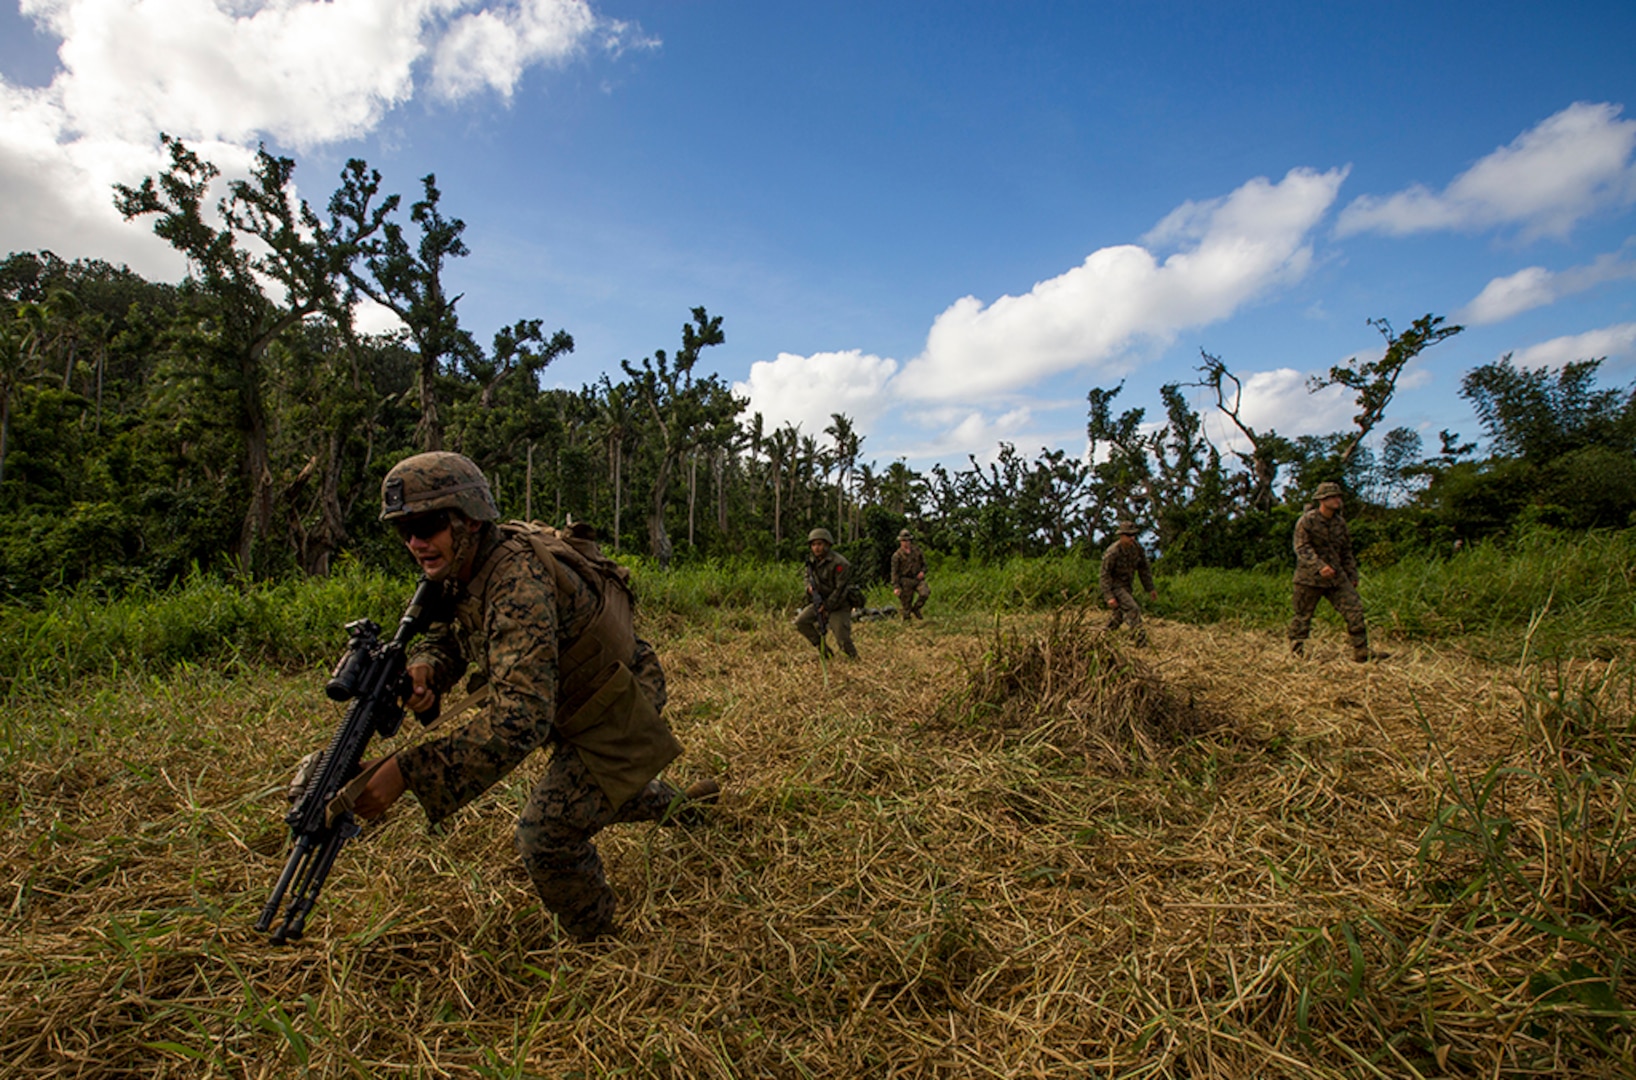 U.S. Marines with Task Force Koa Moana 16.2 and Soldiers from the Republic of Fiji Military Forces conduct integrated fire-team buddy rushes on Ovalau, Fiji, July 13, 2016. Fiji is part of Task Force Koa Moana’s deployment throughout the Asia-Pacific region, where Marines and Sailors will share engineering and infantry skills with the Republic of Fiji Military Forces to strengthen mil-to-mil relationships and interoperability. 